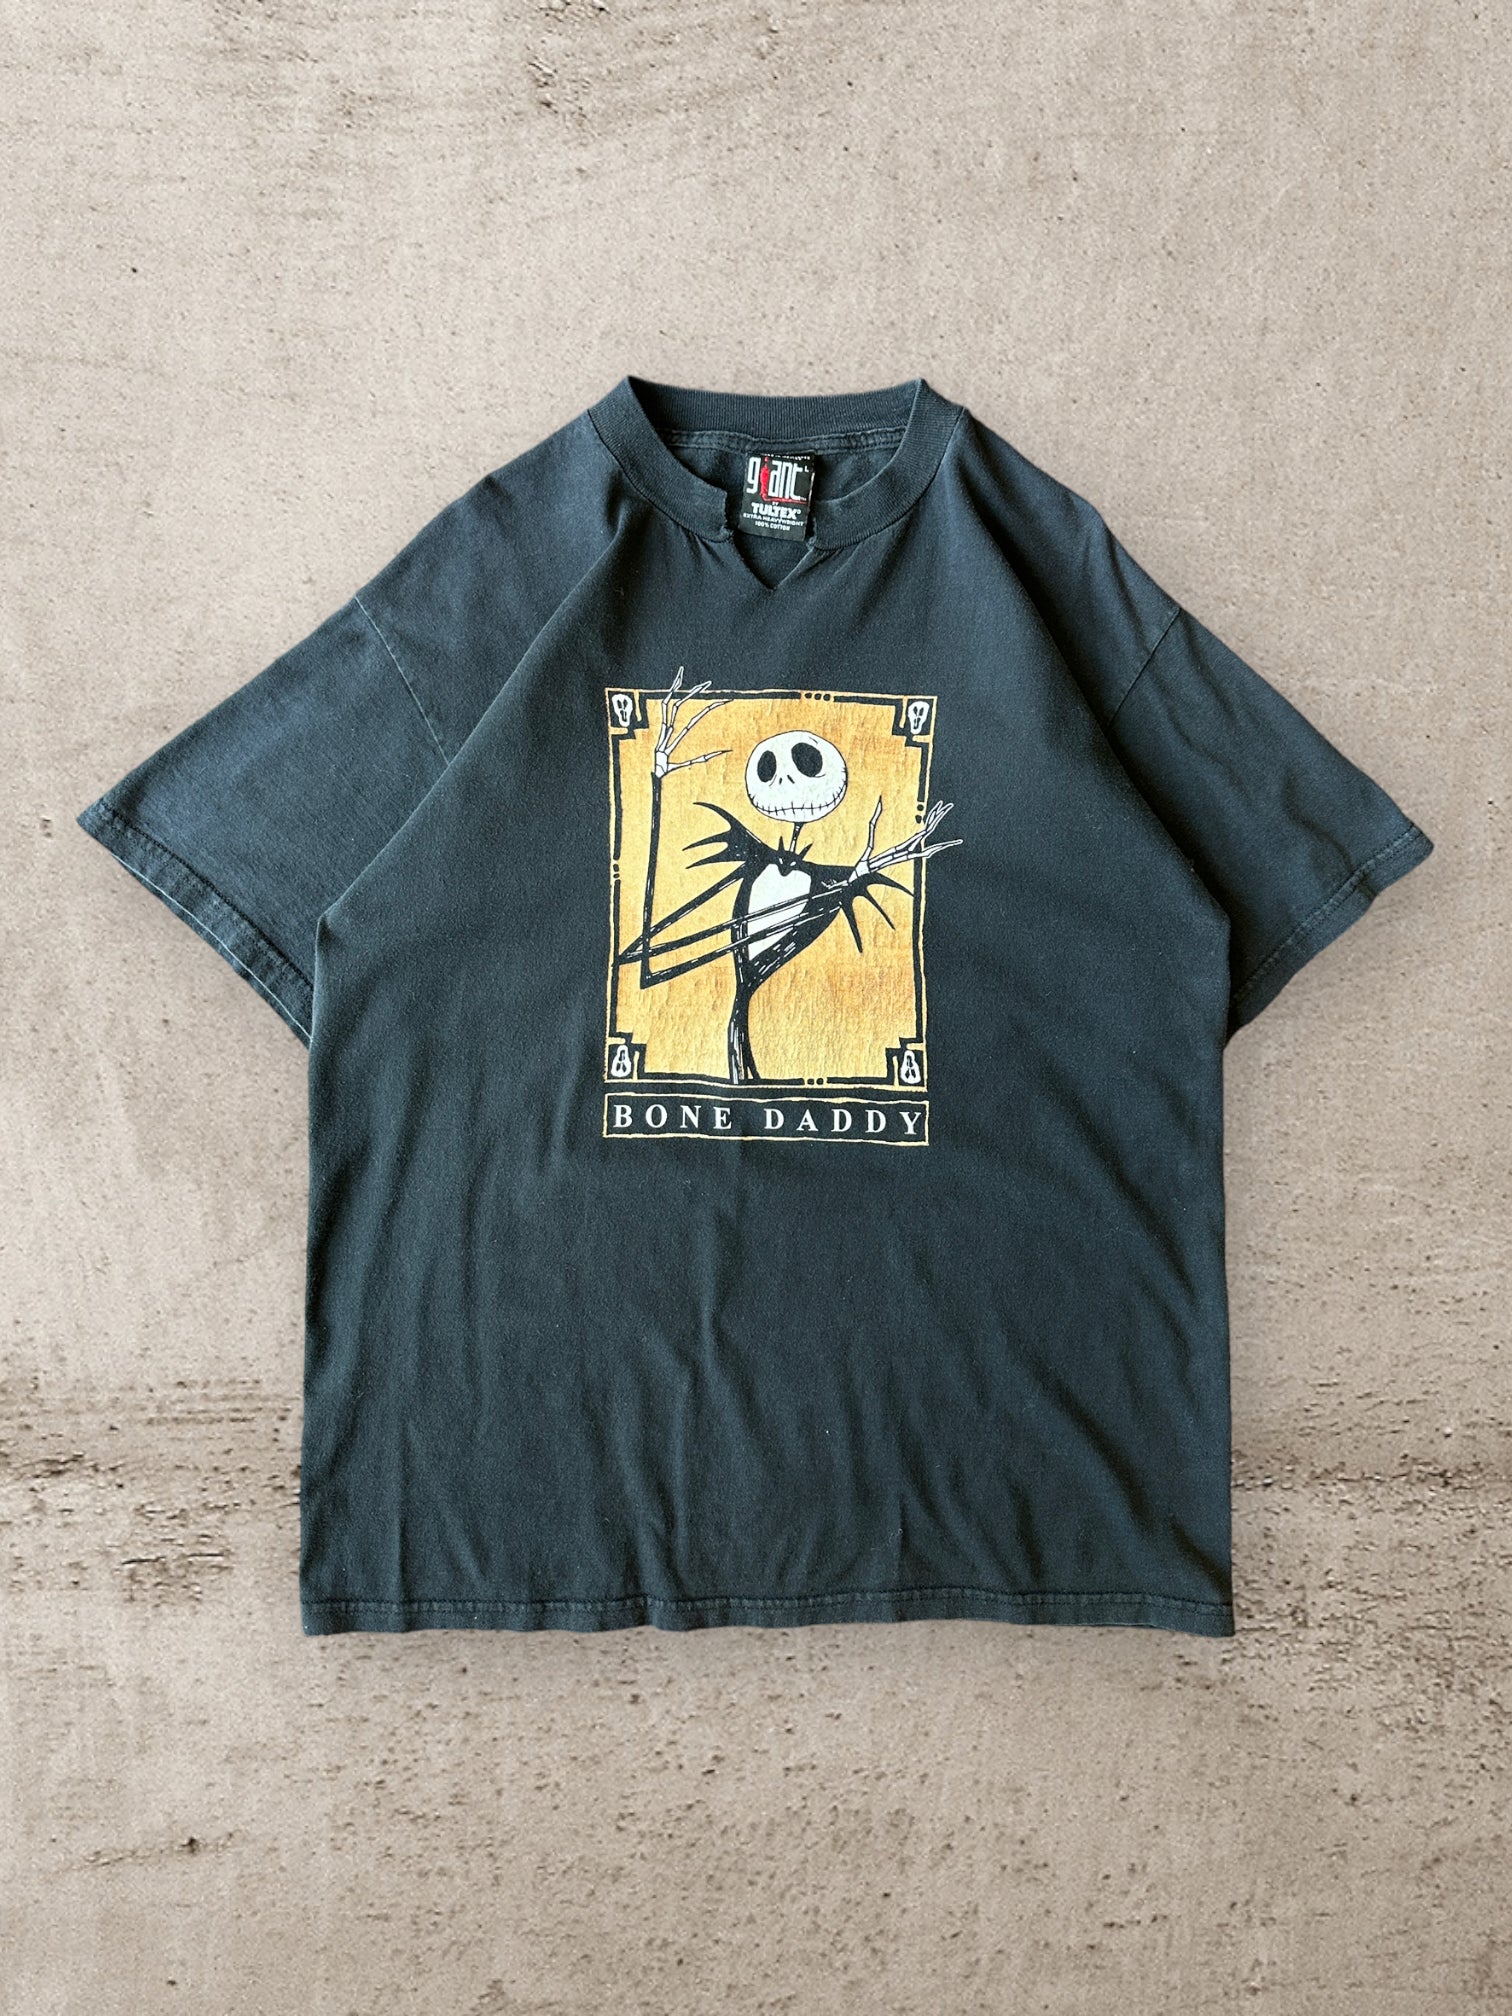 90s Nightmare Before Christmas Bone Daddy T-Shirt - Large